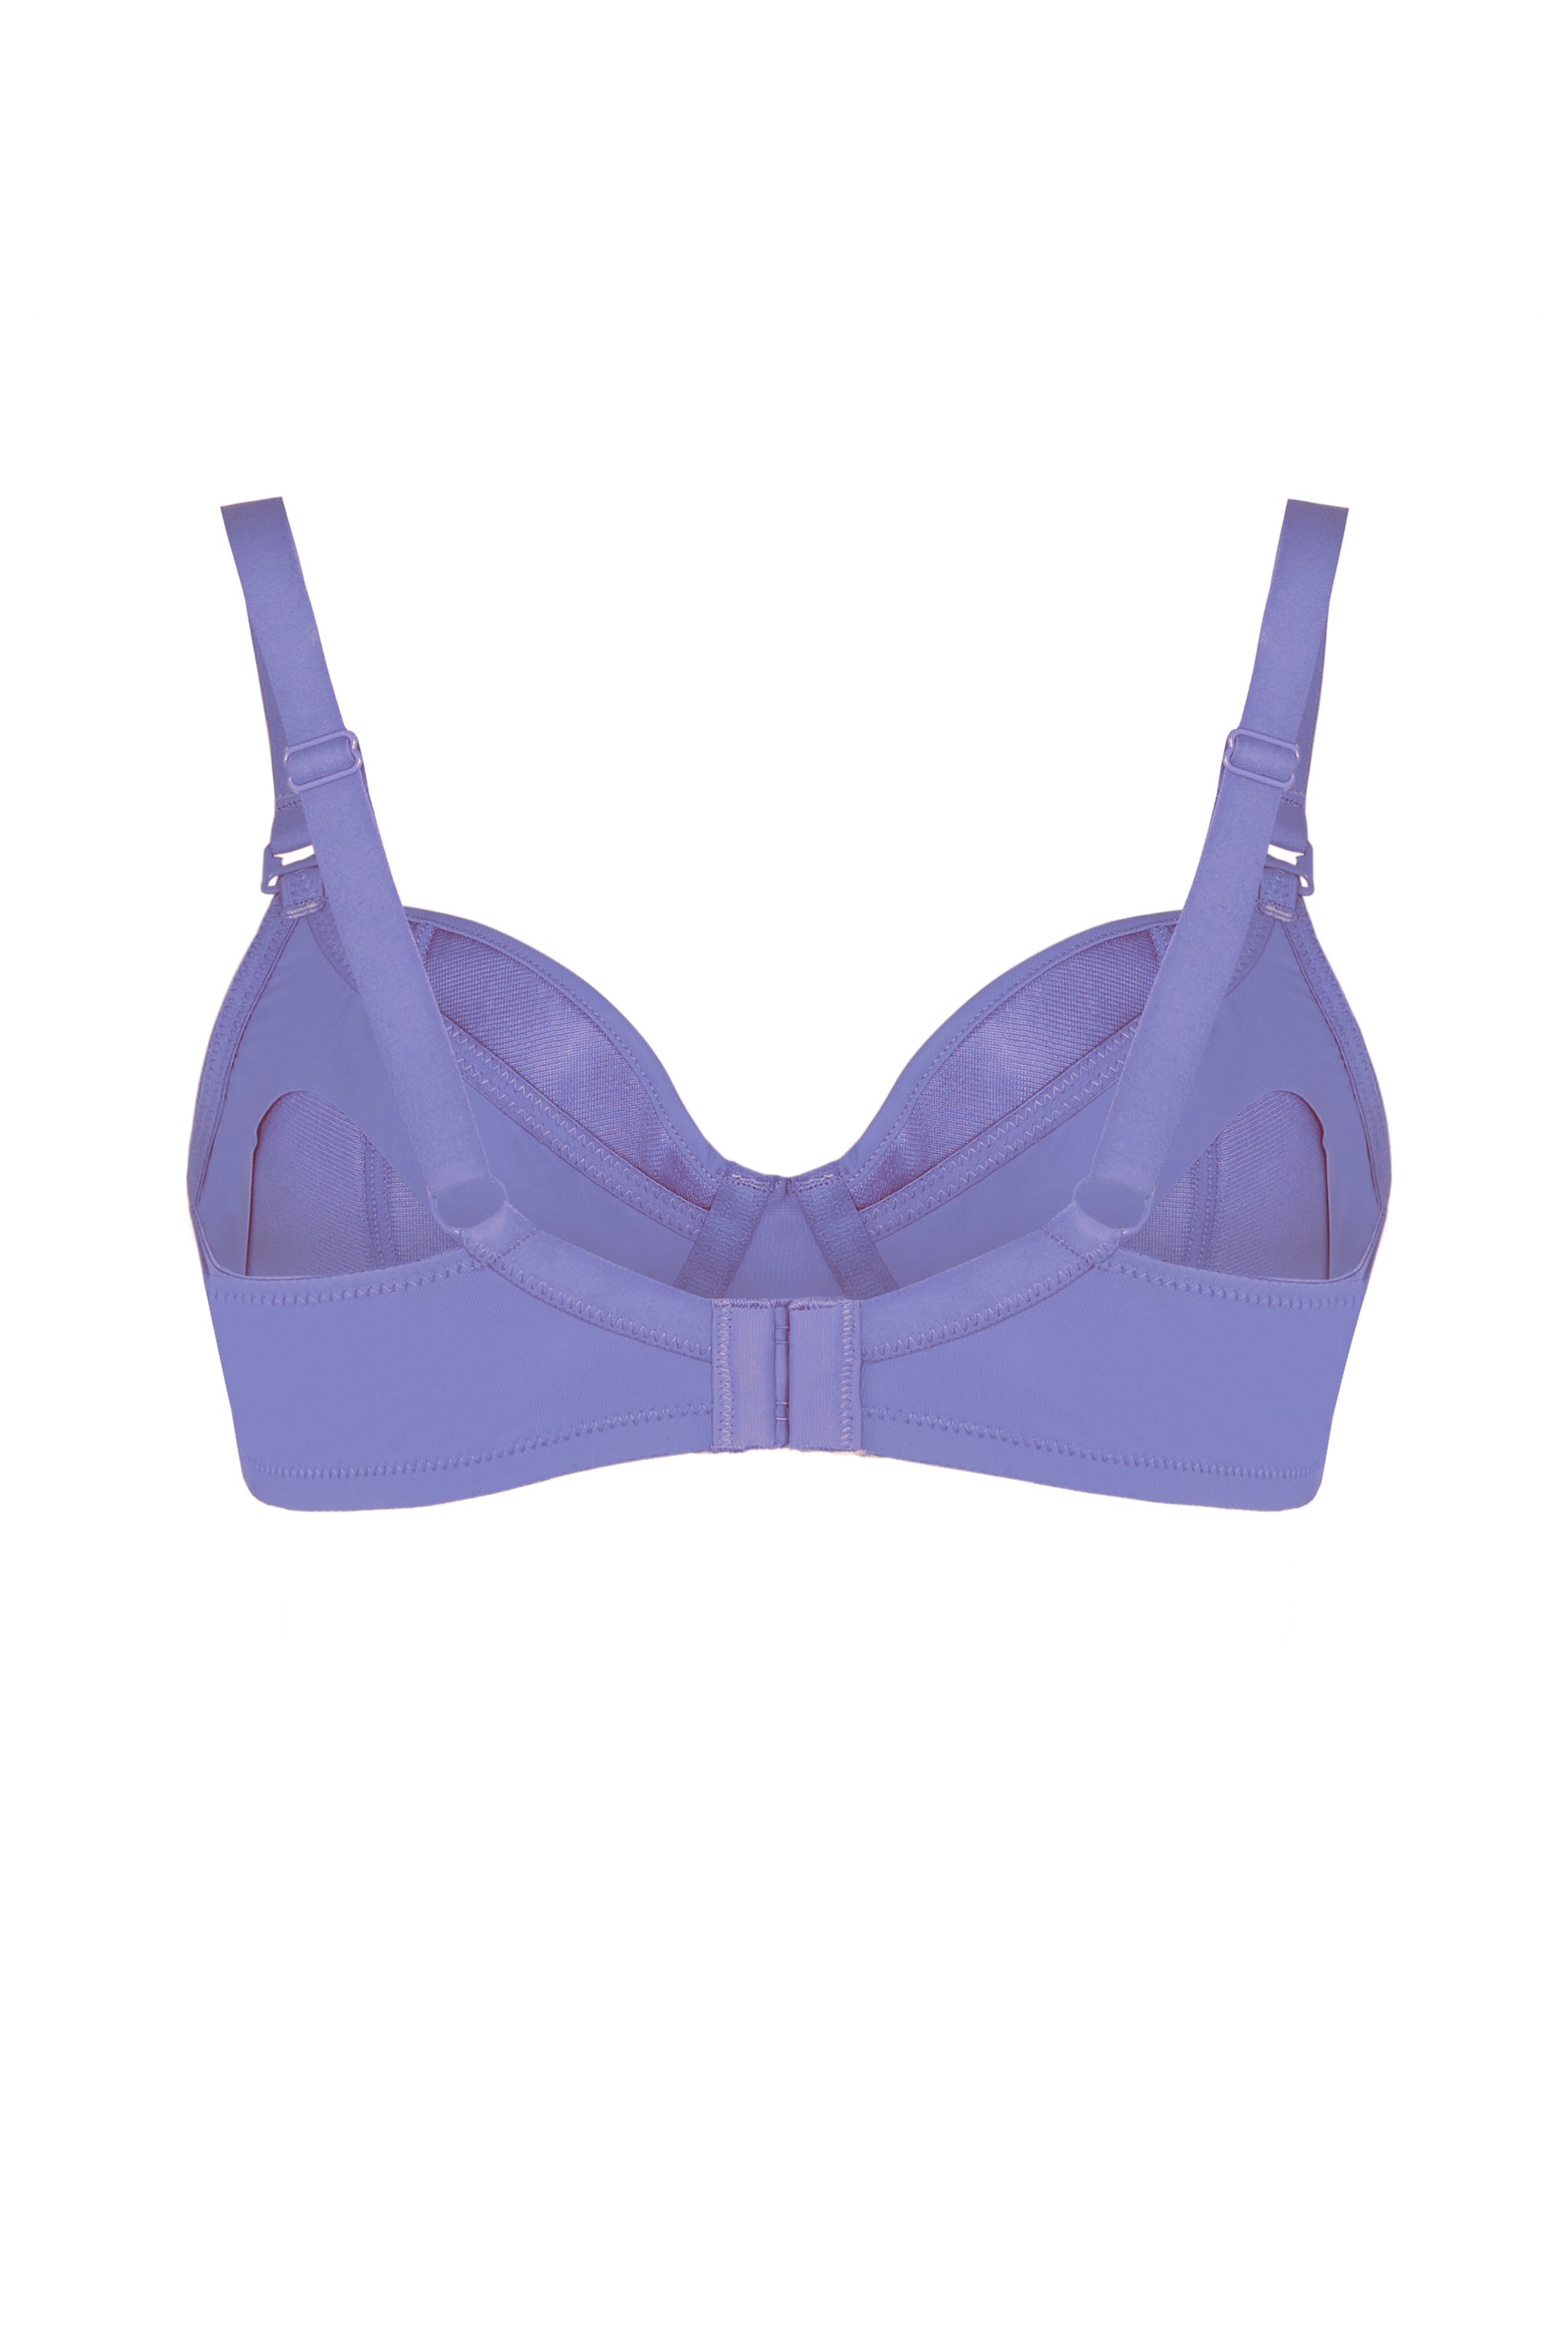 Royce Indie Non-Wire Molded Nursing Bra (1401),32D,Lilac at